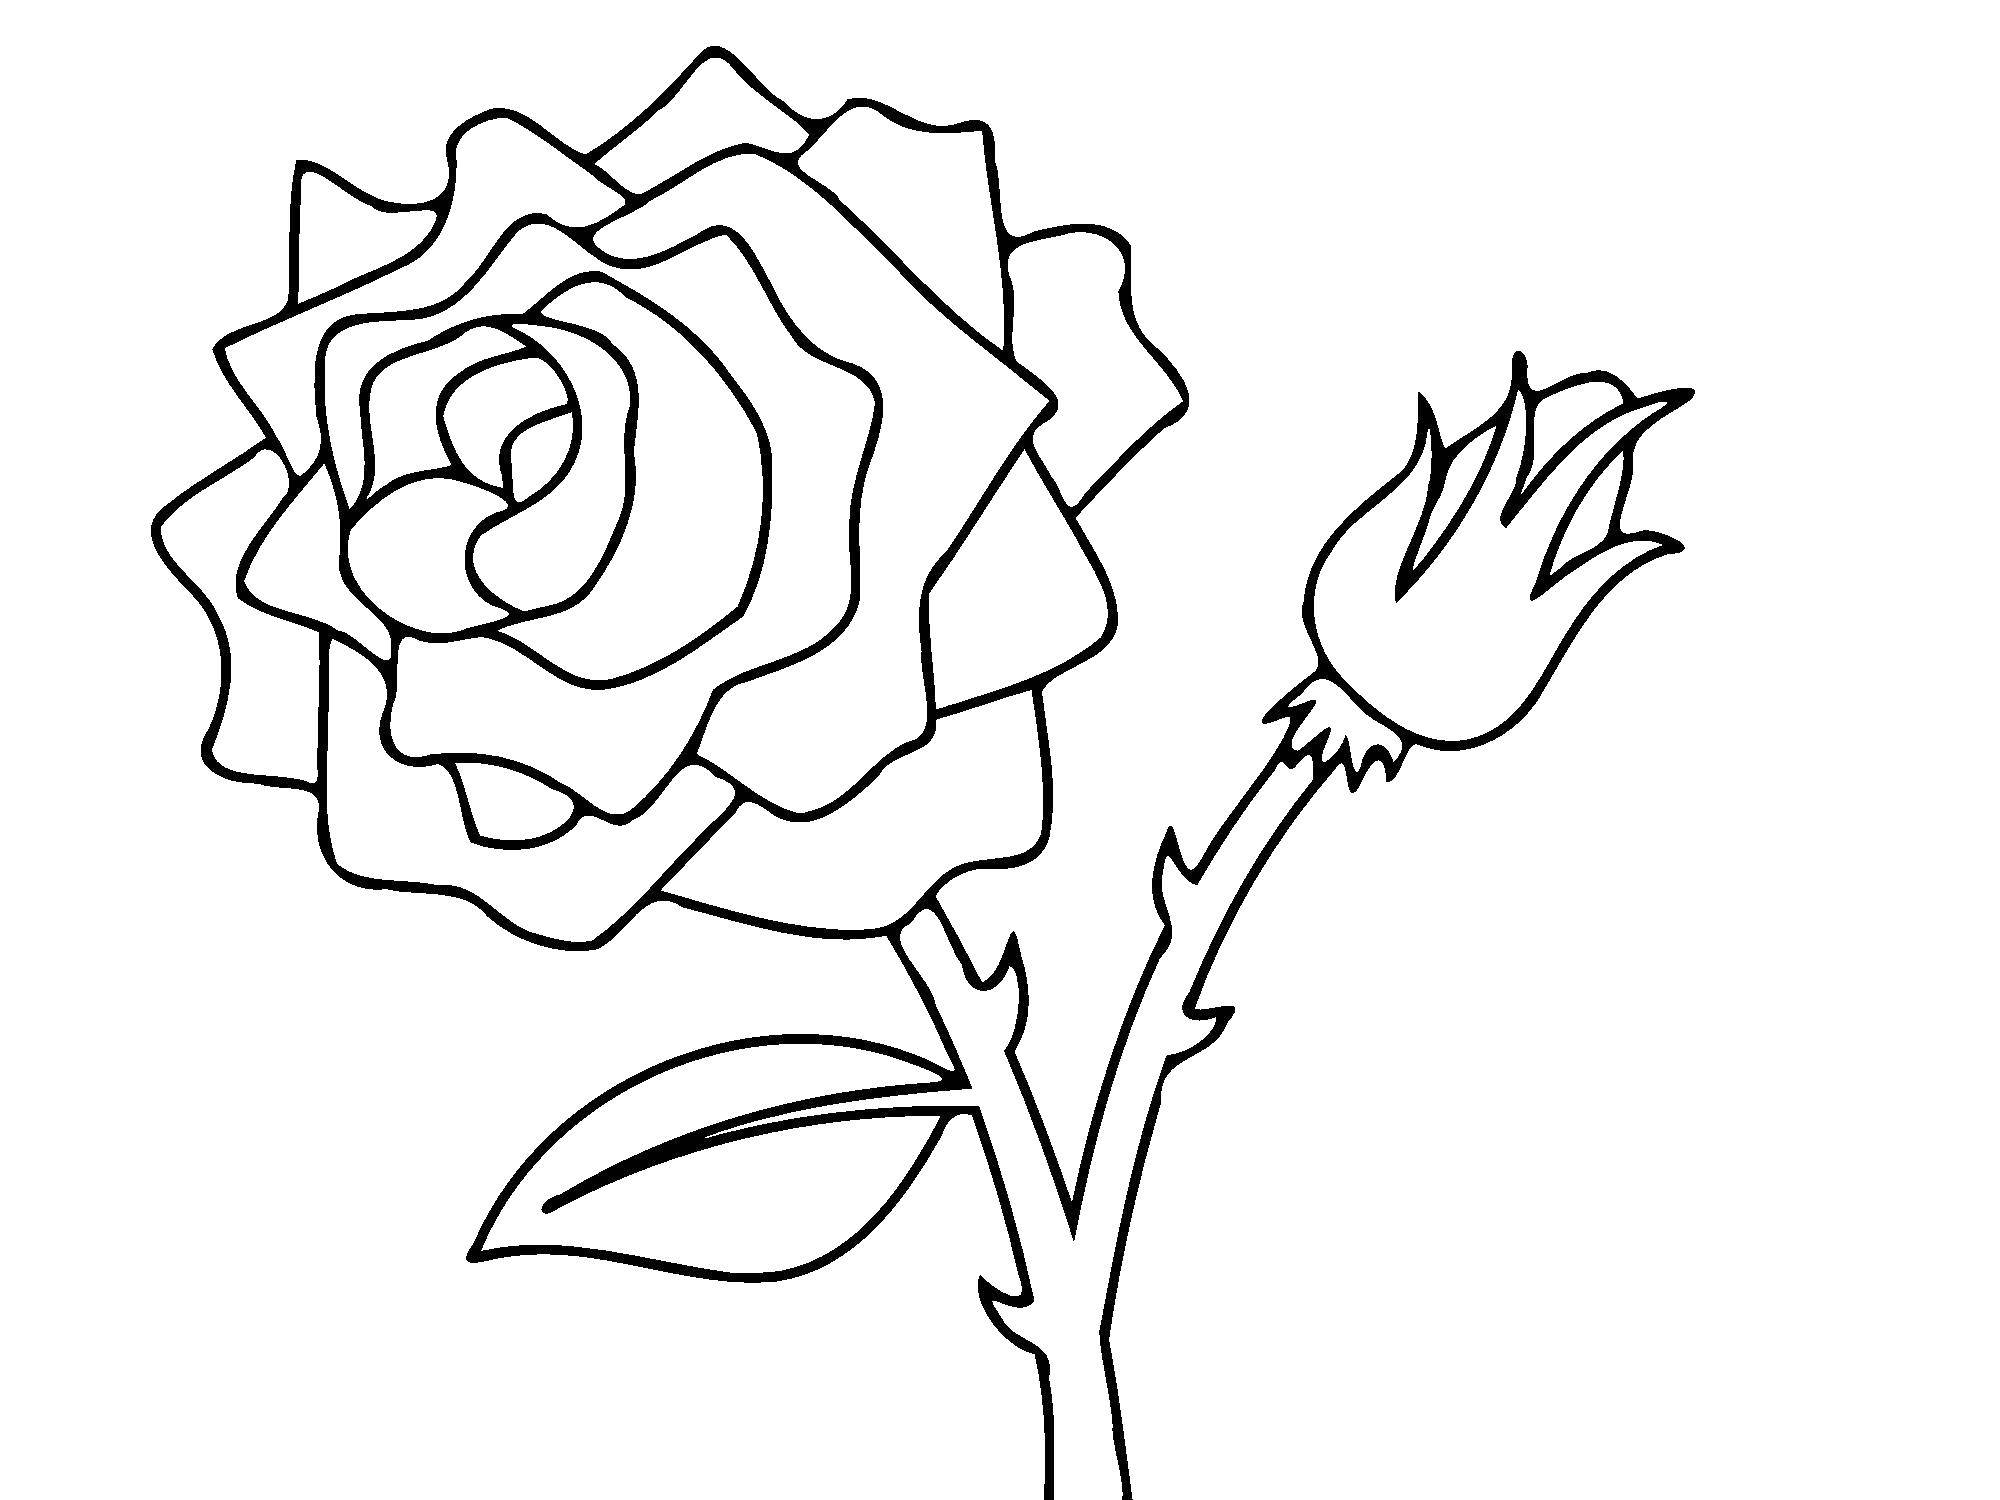 Coloring Rose and rosebud. Category The contours of a rose. Tags:  Flowers, roses.